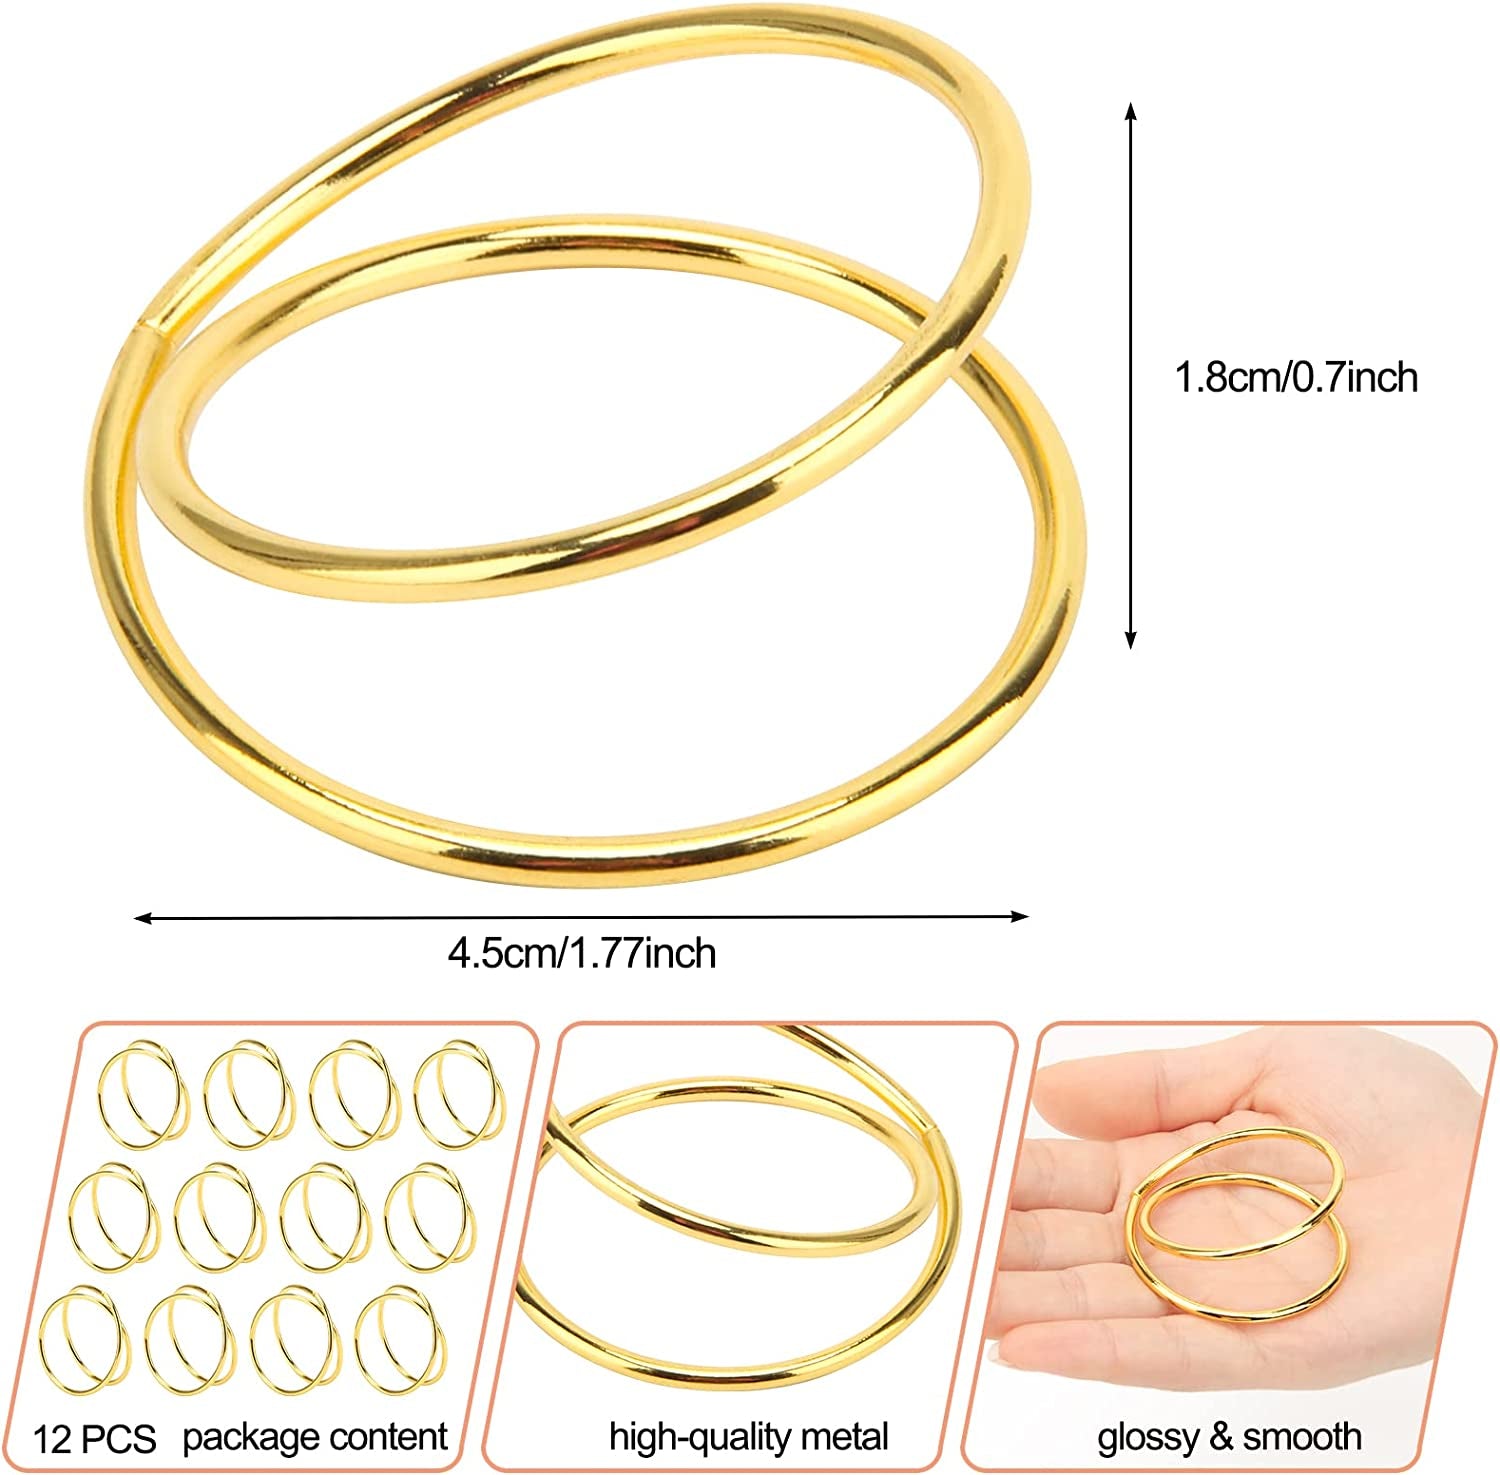 Gold Napkin Rings, 12 PCS Metal Spiral Napkin Rings, Napkin Holders Buckles for Wedding, Dinner Party, Table Decorations